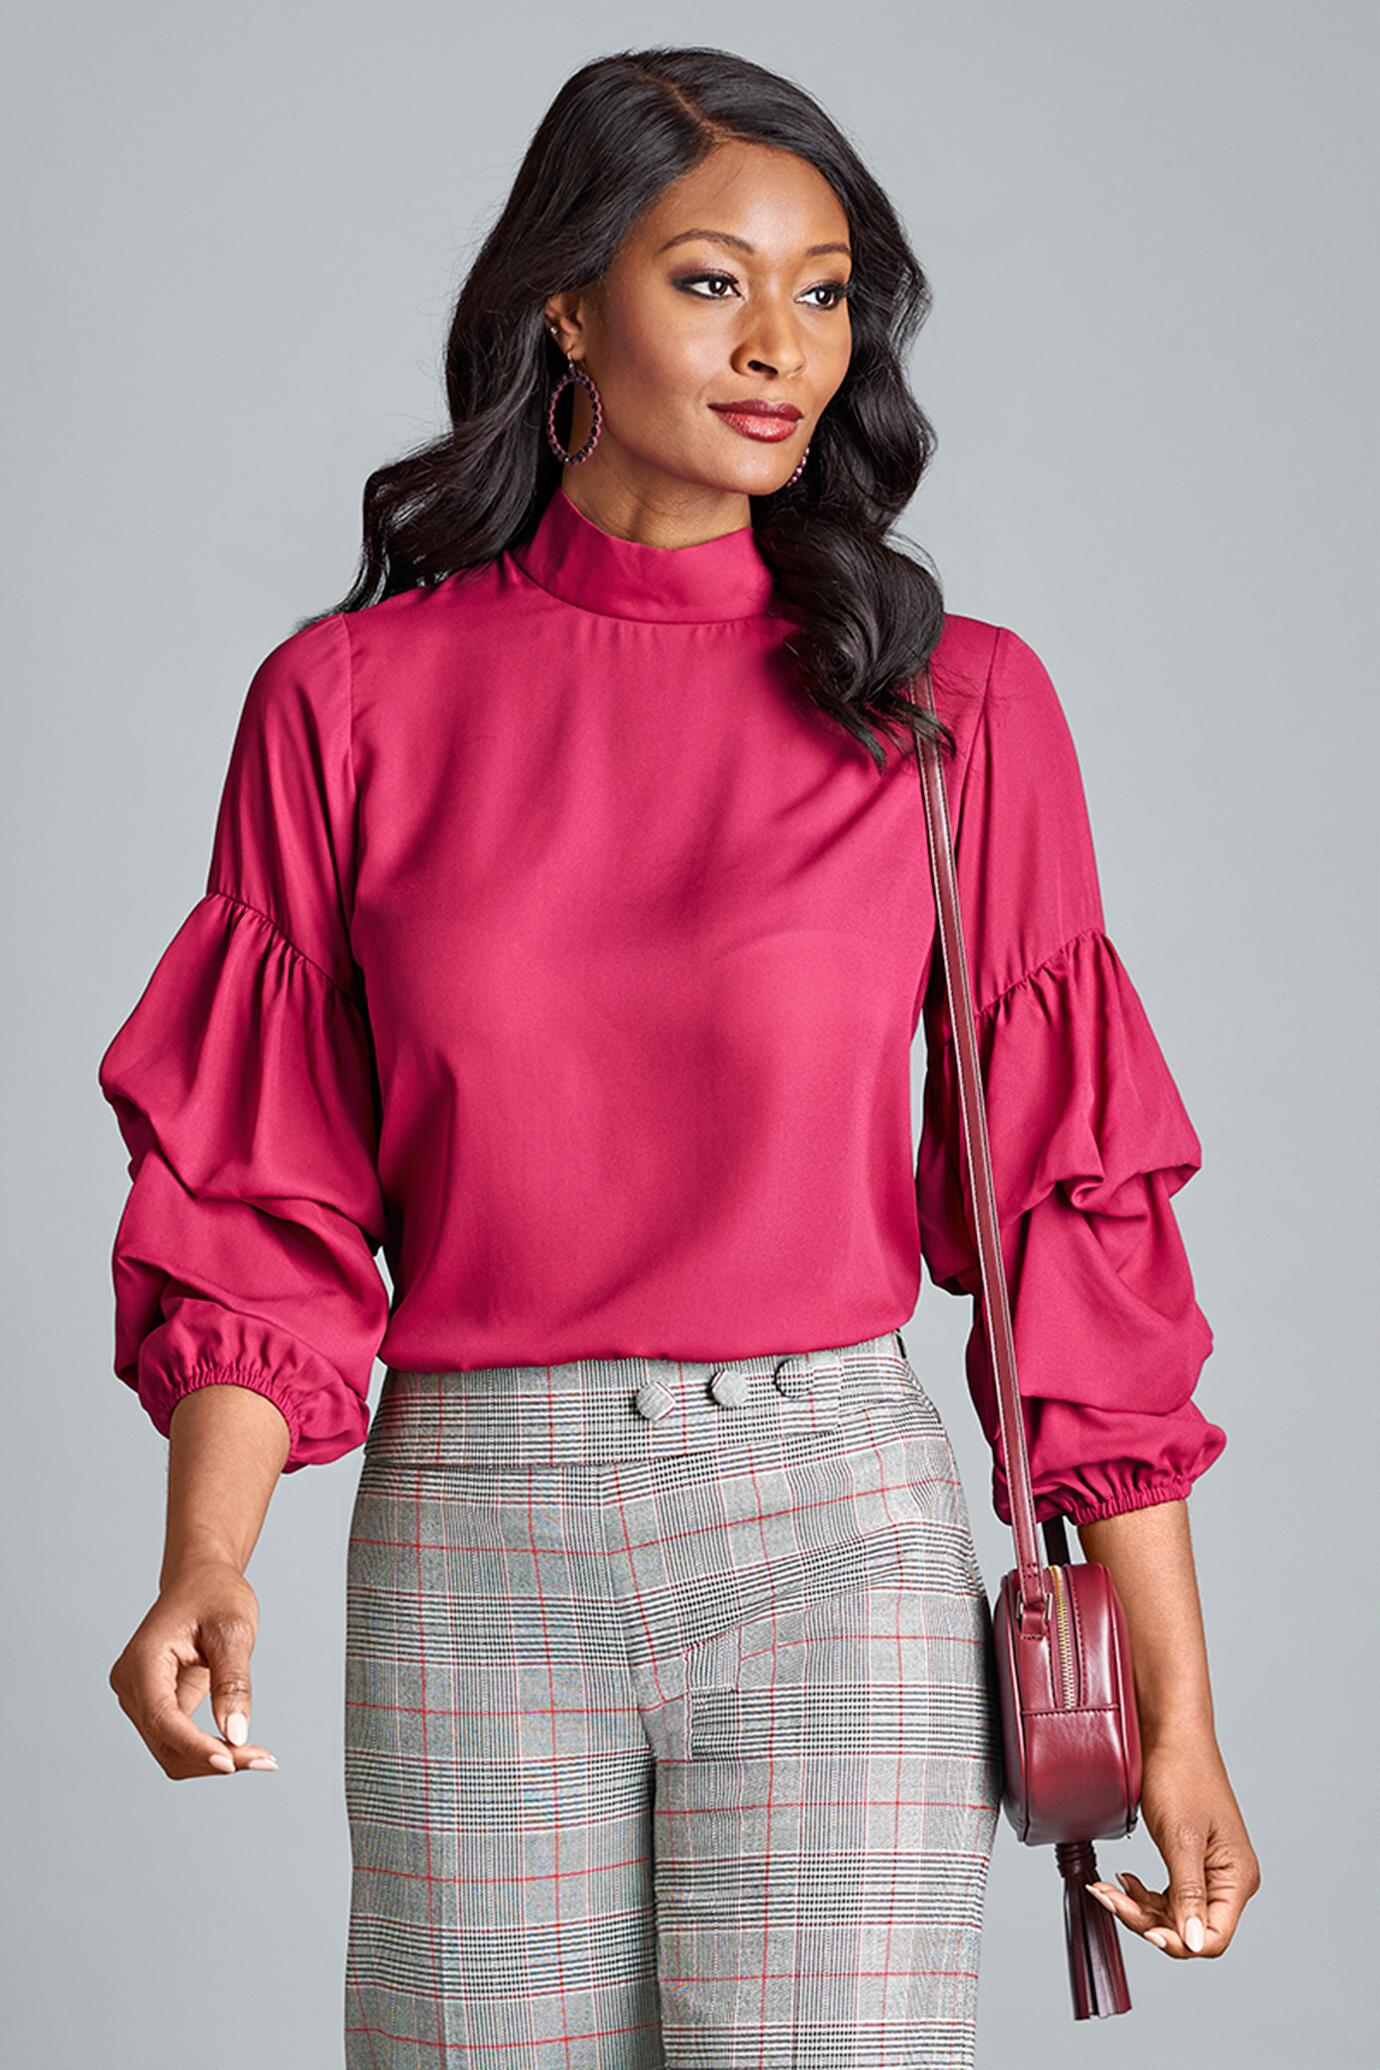 Puffy Sleeve Blouse - Misses